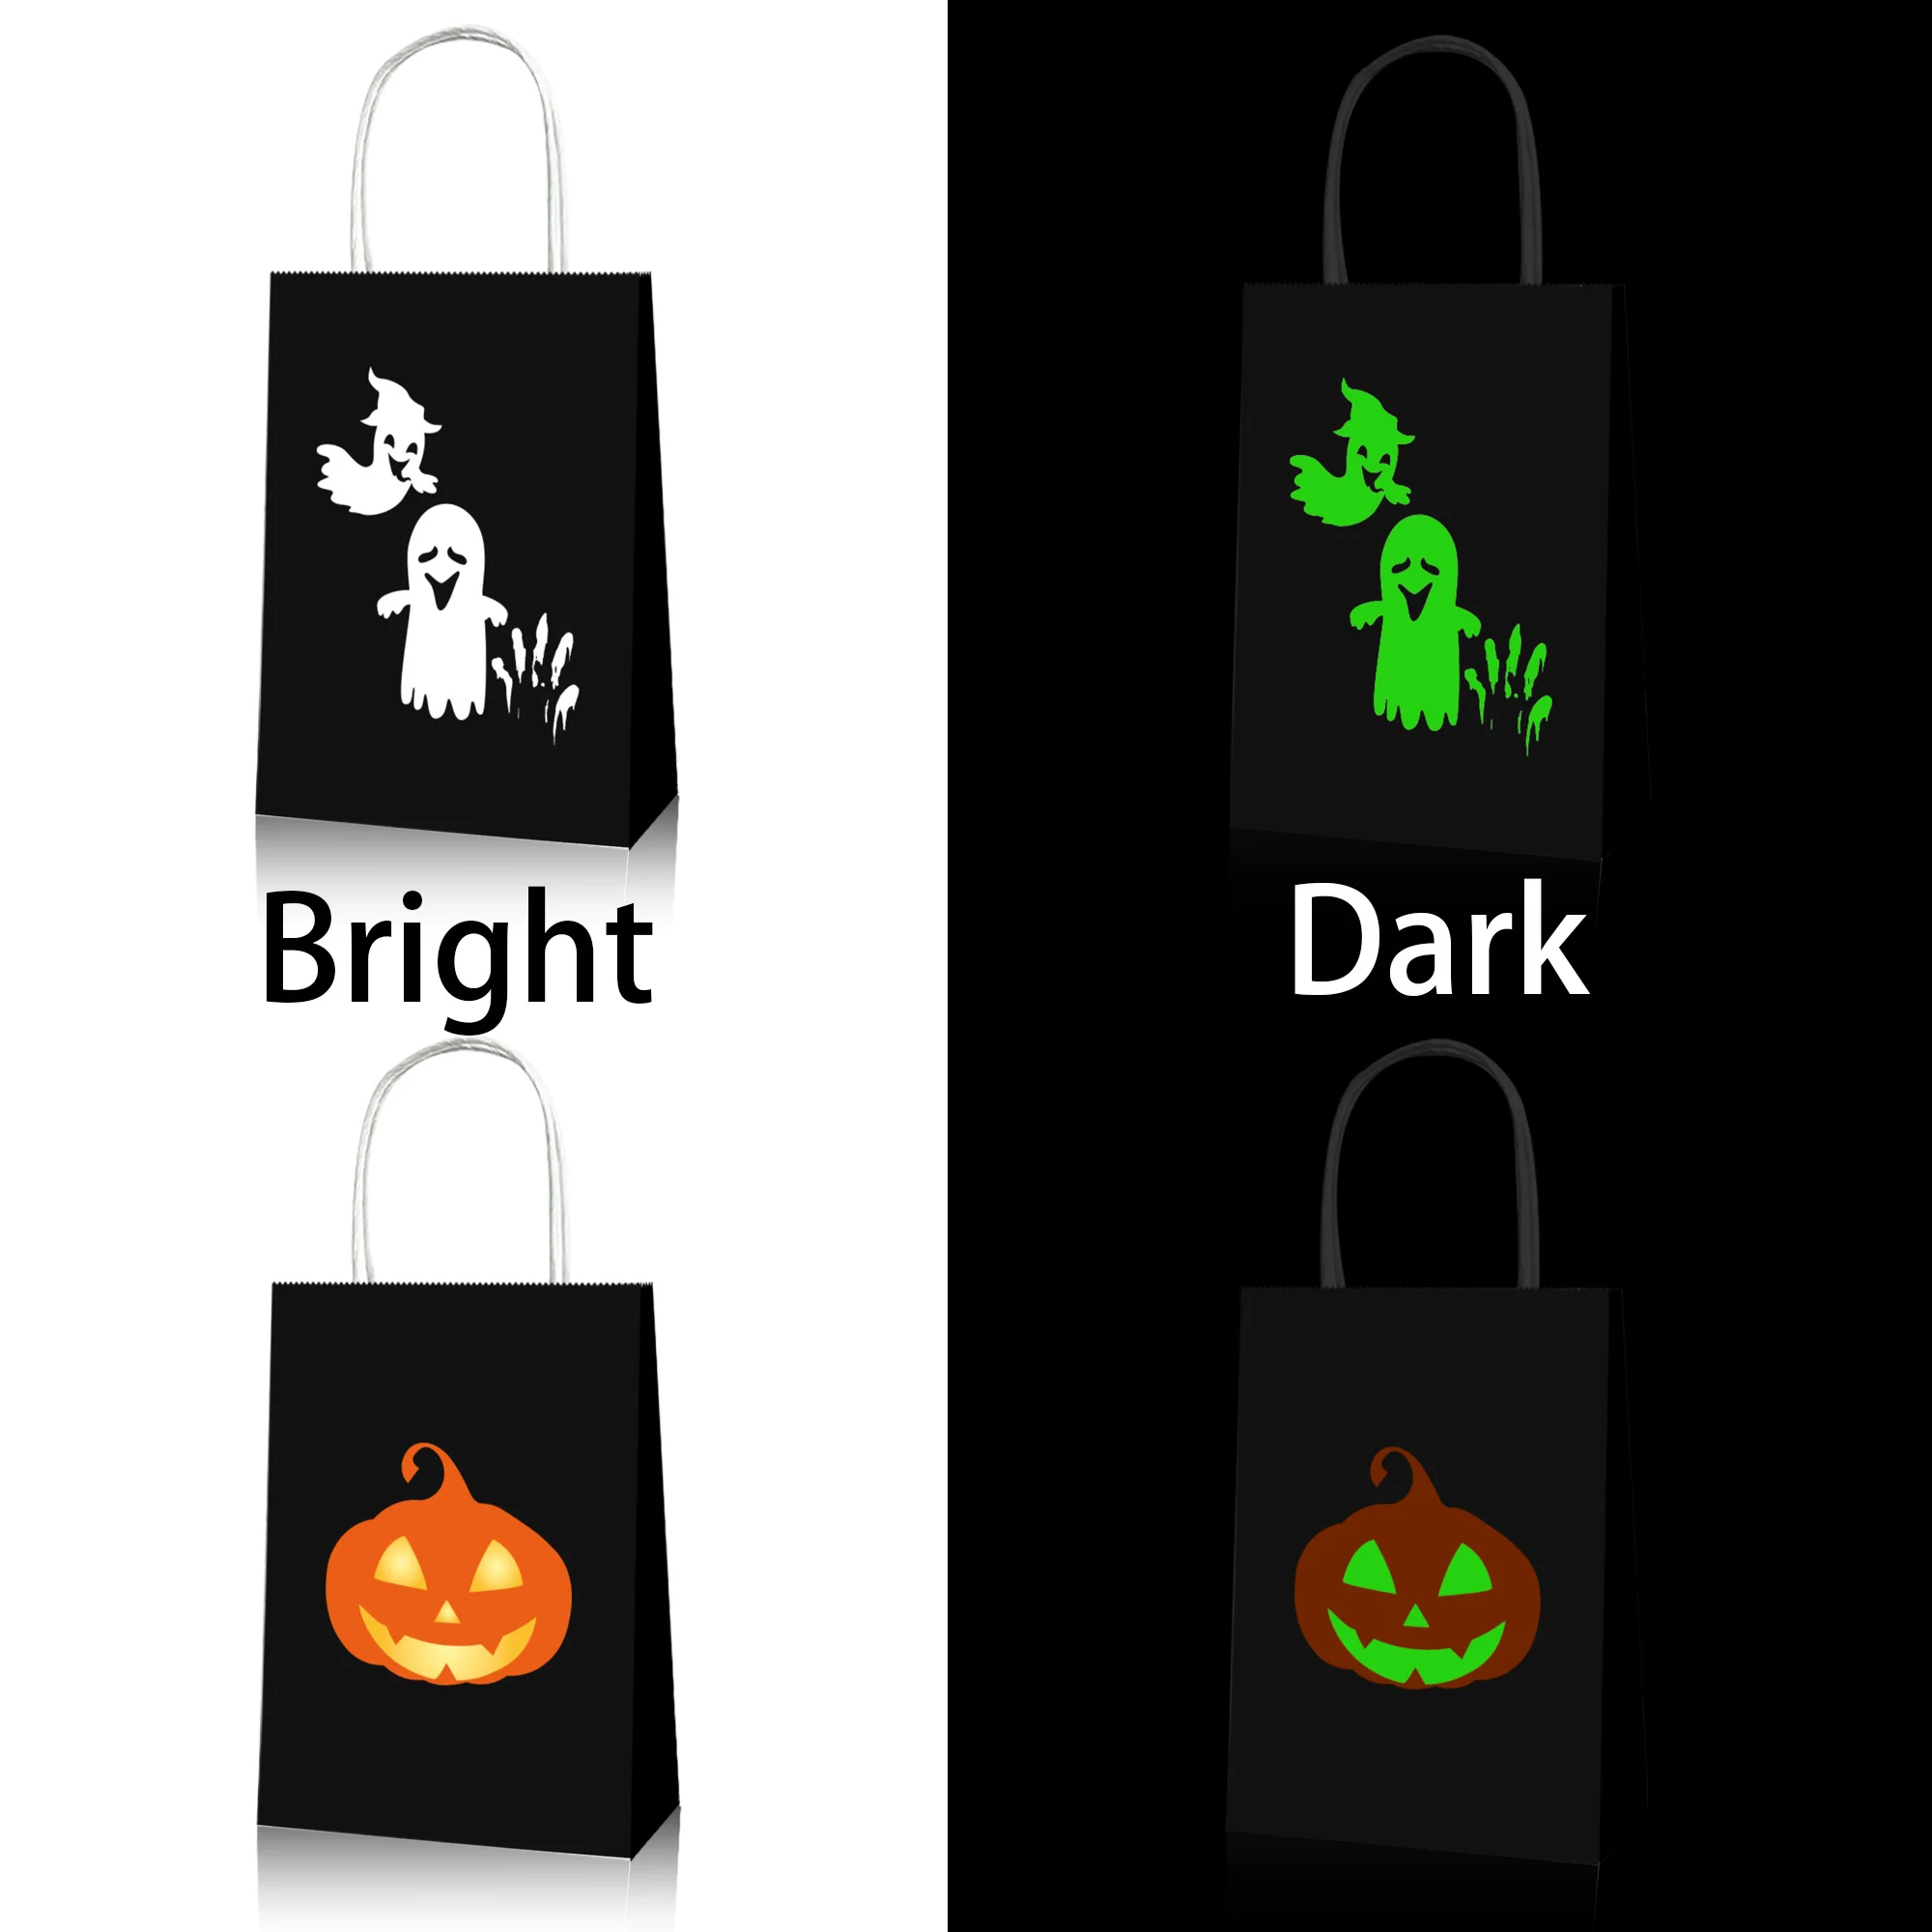 

BD048 12Pcs Special Halloweeen Boo Ghost Party Fluorescent Glow Portable Tote Paper Gift Bags Treat or Trick Party Decorations